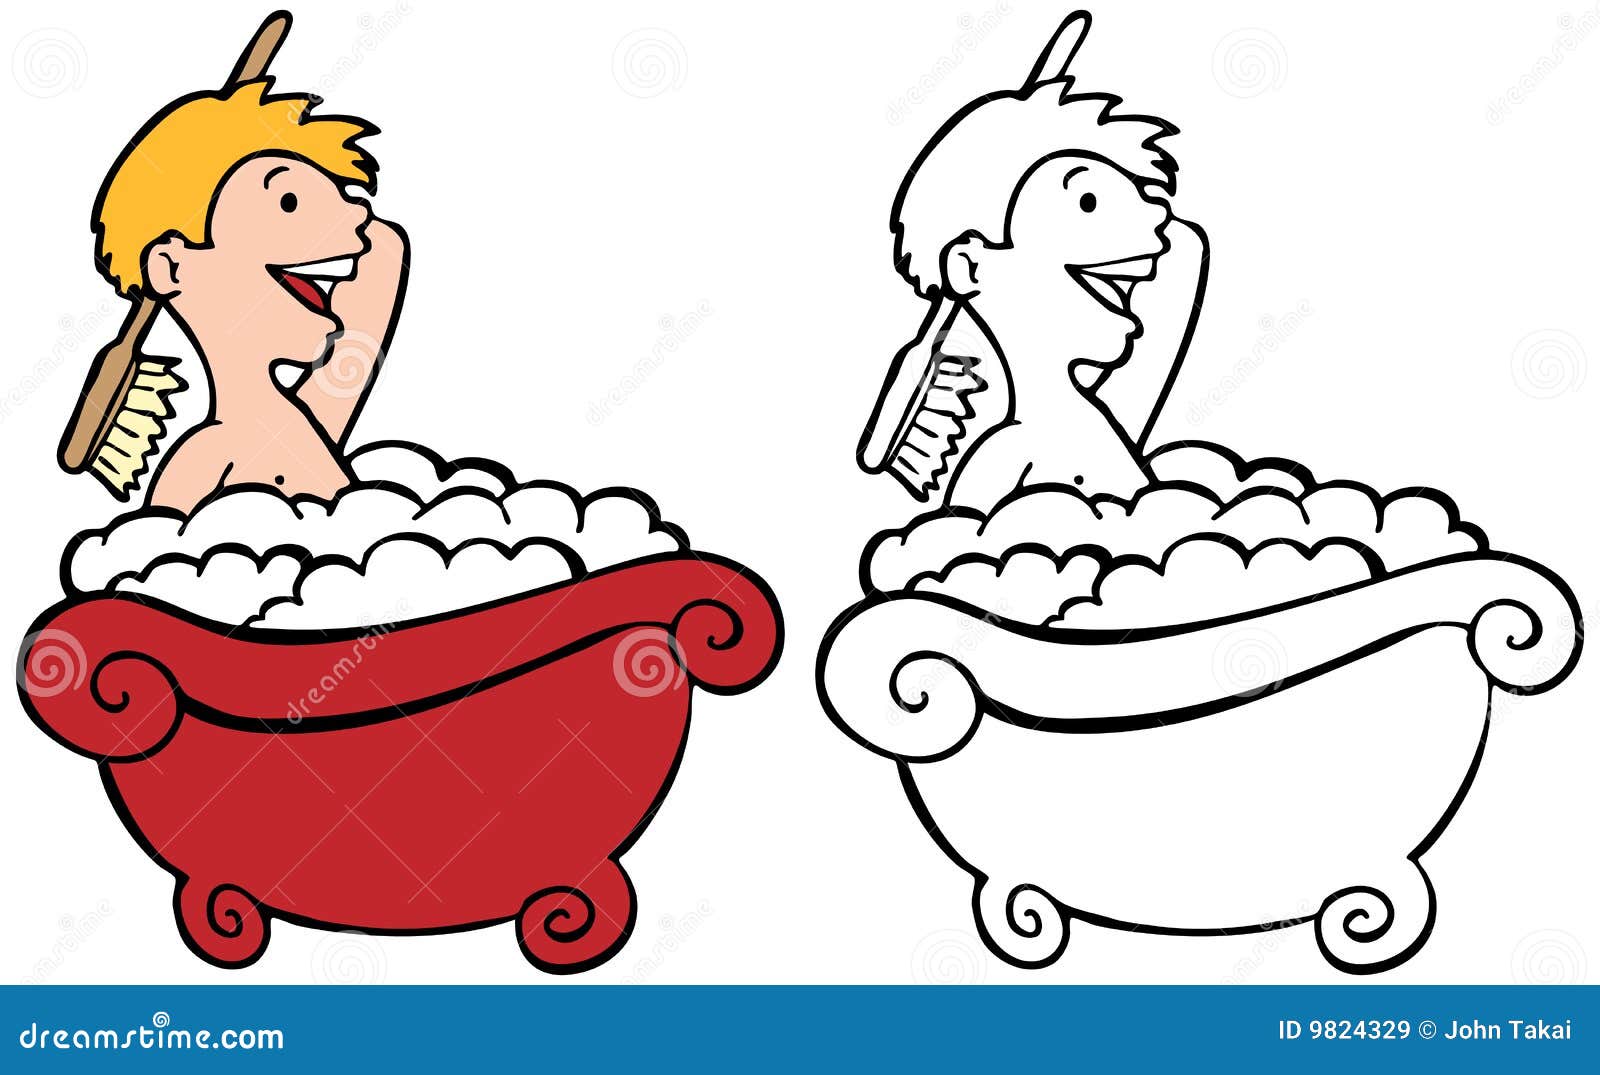 Download Kid In Bathtub Royalty Free Stock Images - Image: 9824329